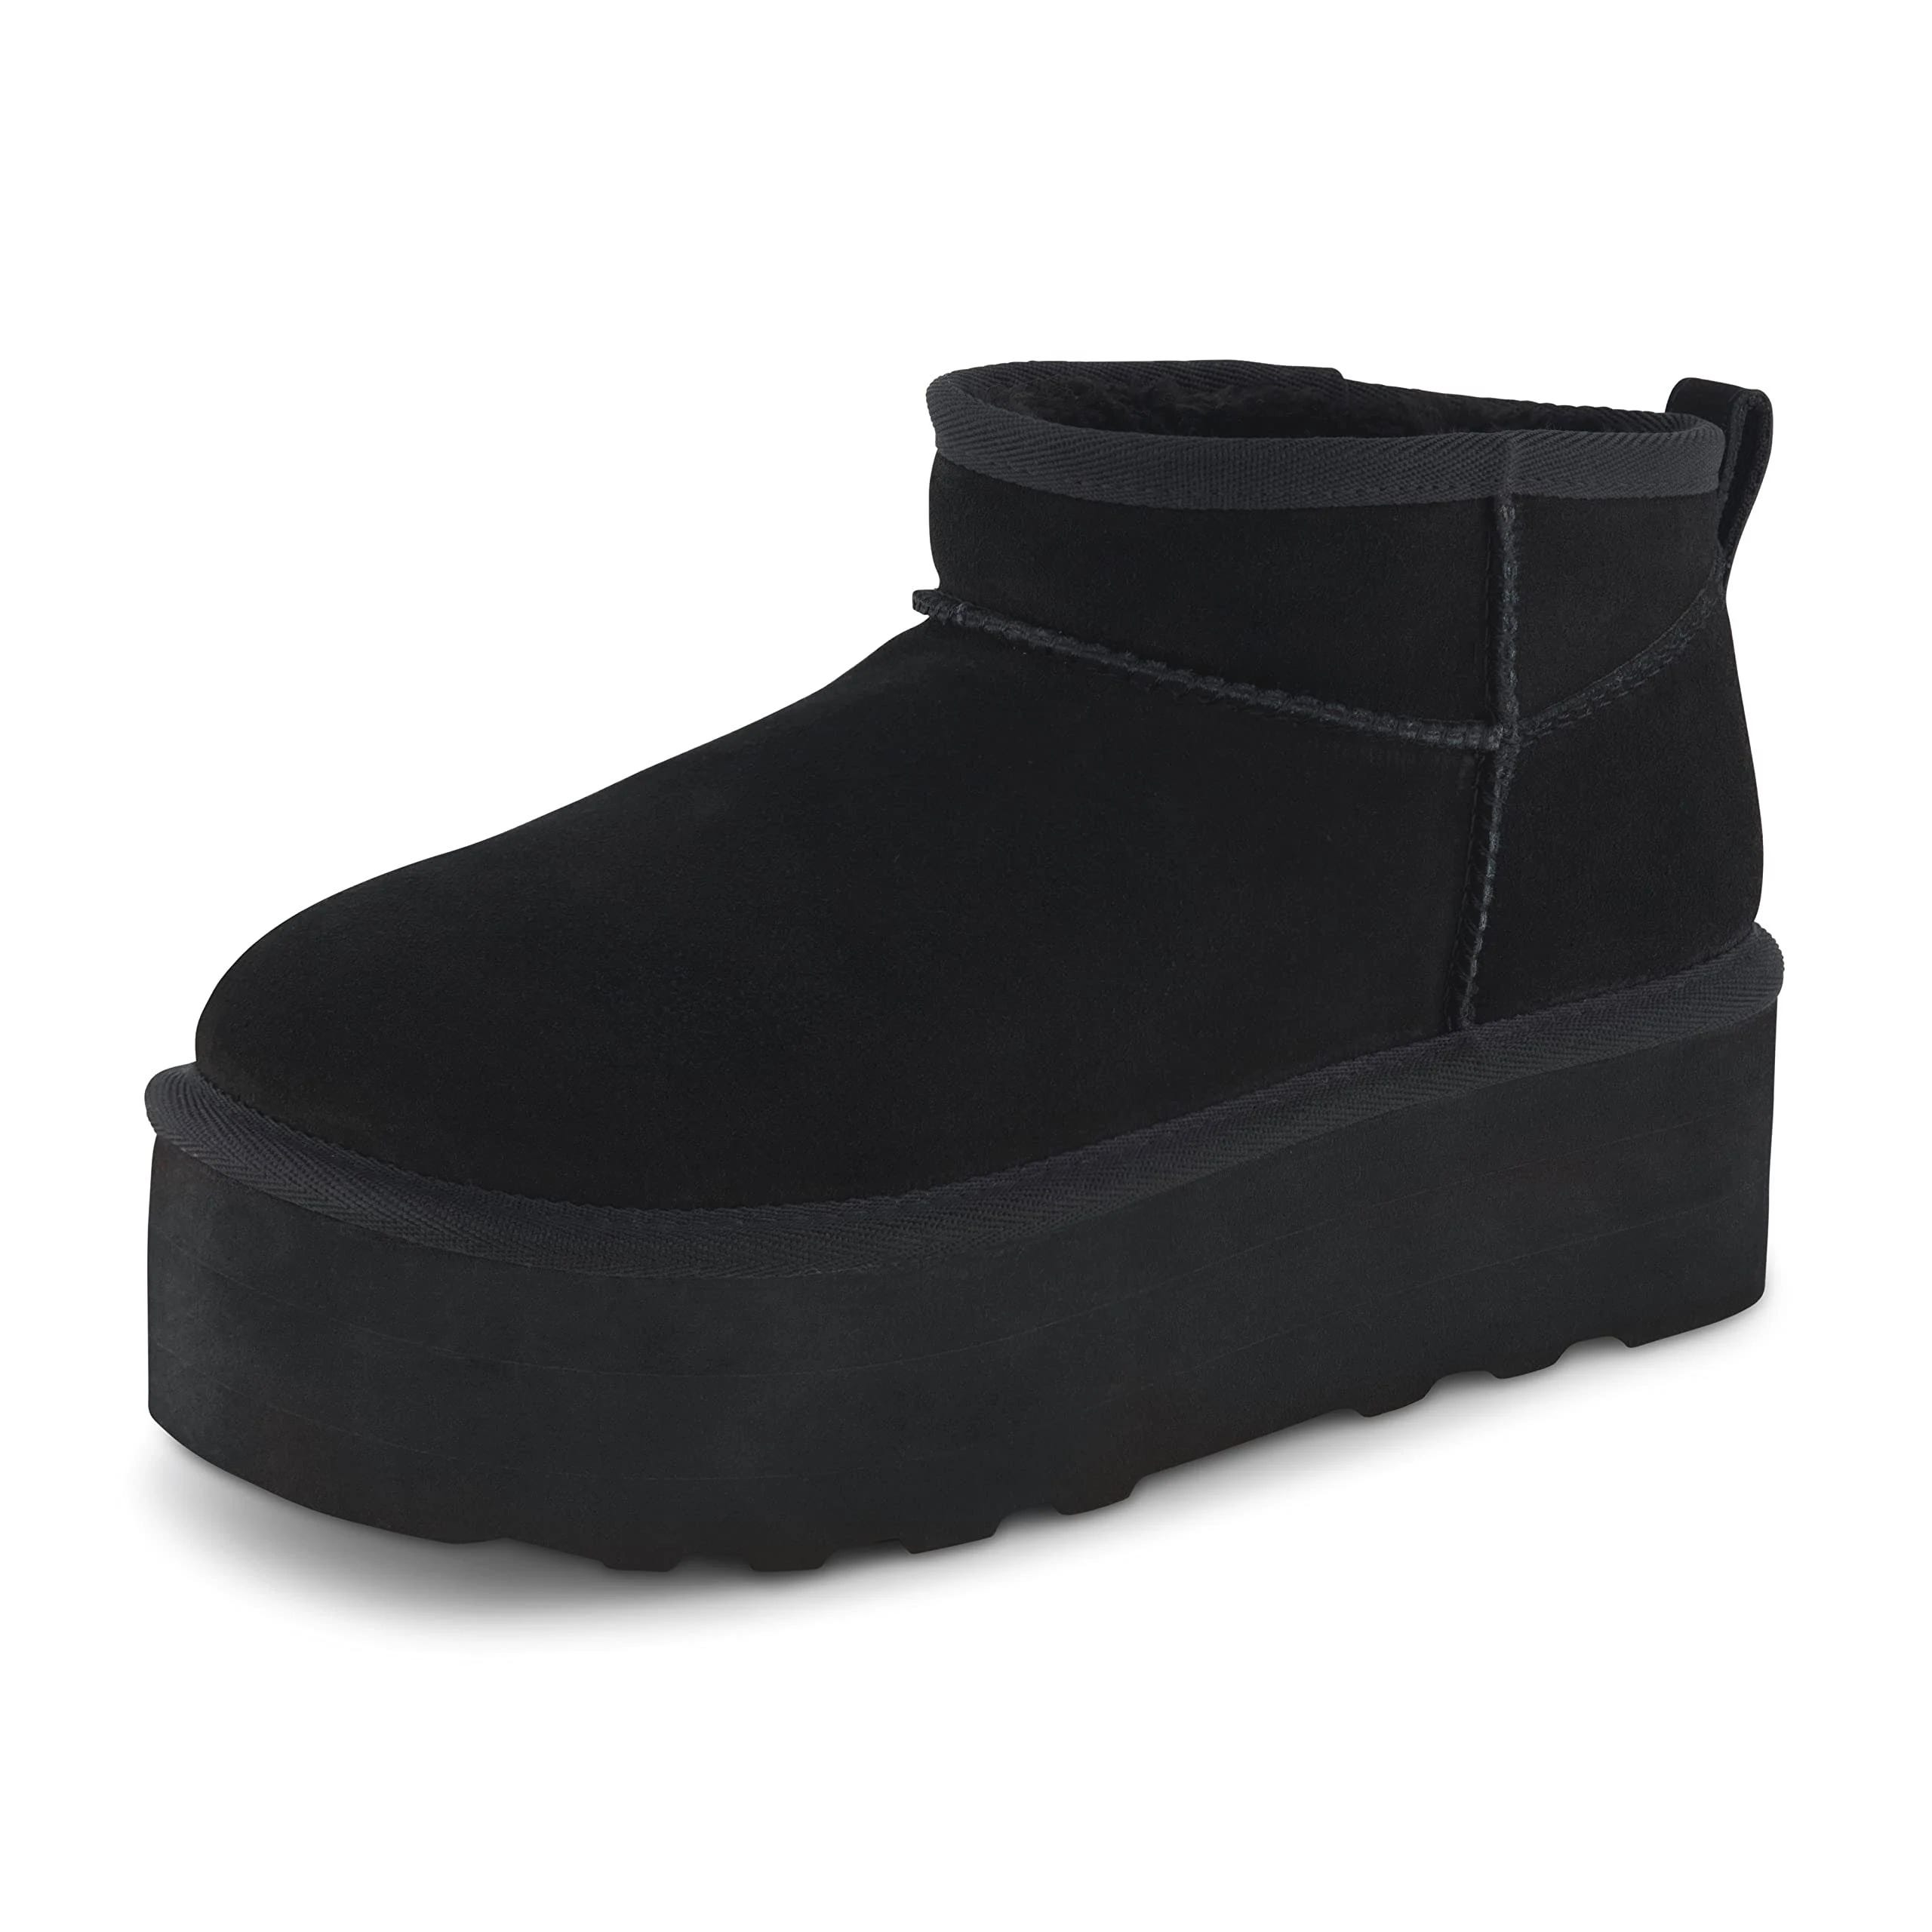 Comfortable Suede Platform Boots with Memory Foam Insoles | Image